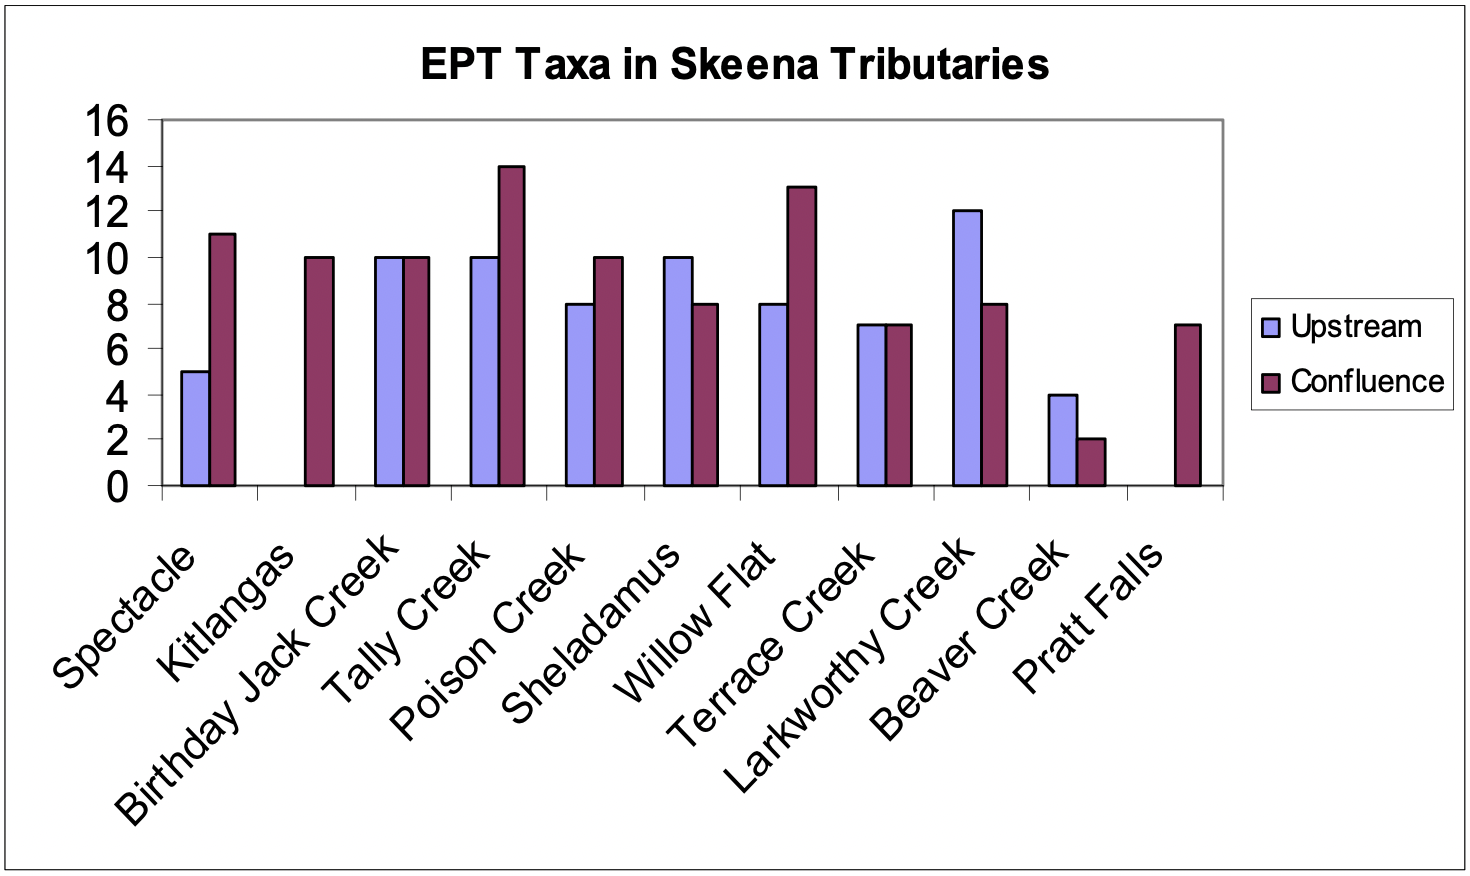 Figure 7. Comparison of EPT taxa between upstream and confluence reaches of 11 Skeena tributaries